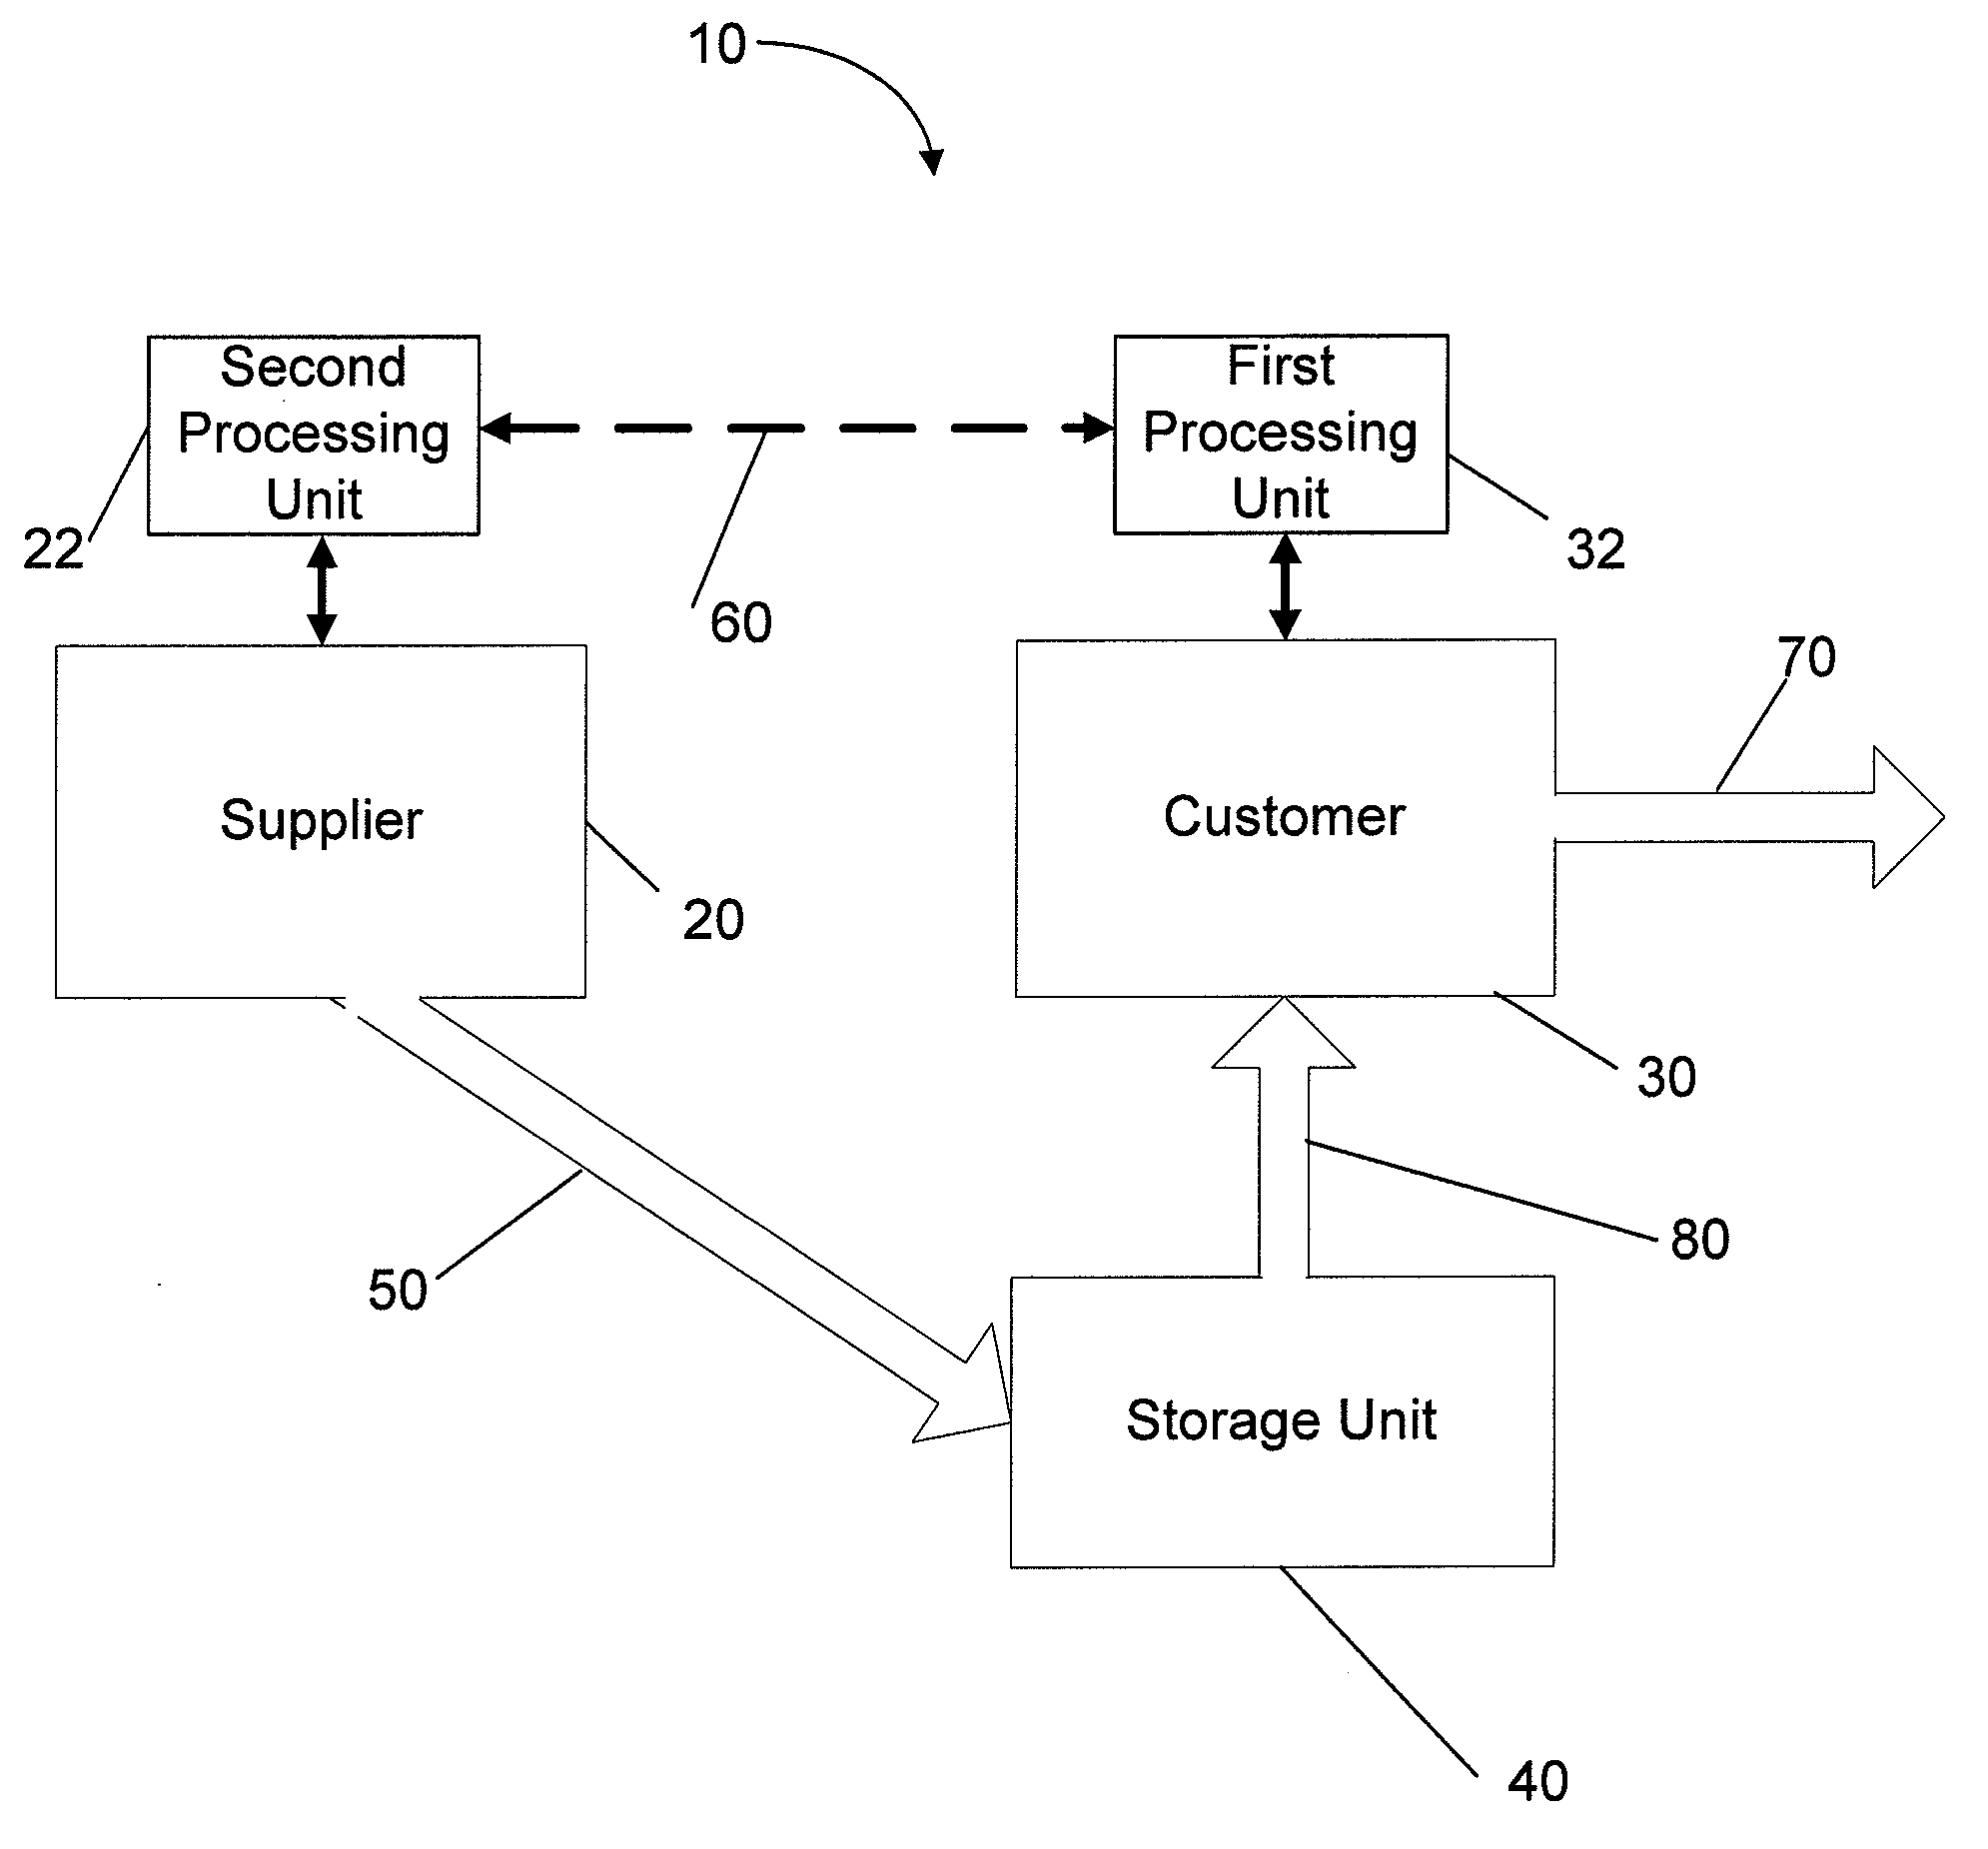 Apparatus and method for controlling inventory